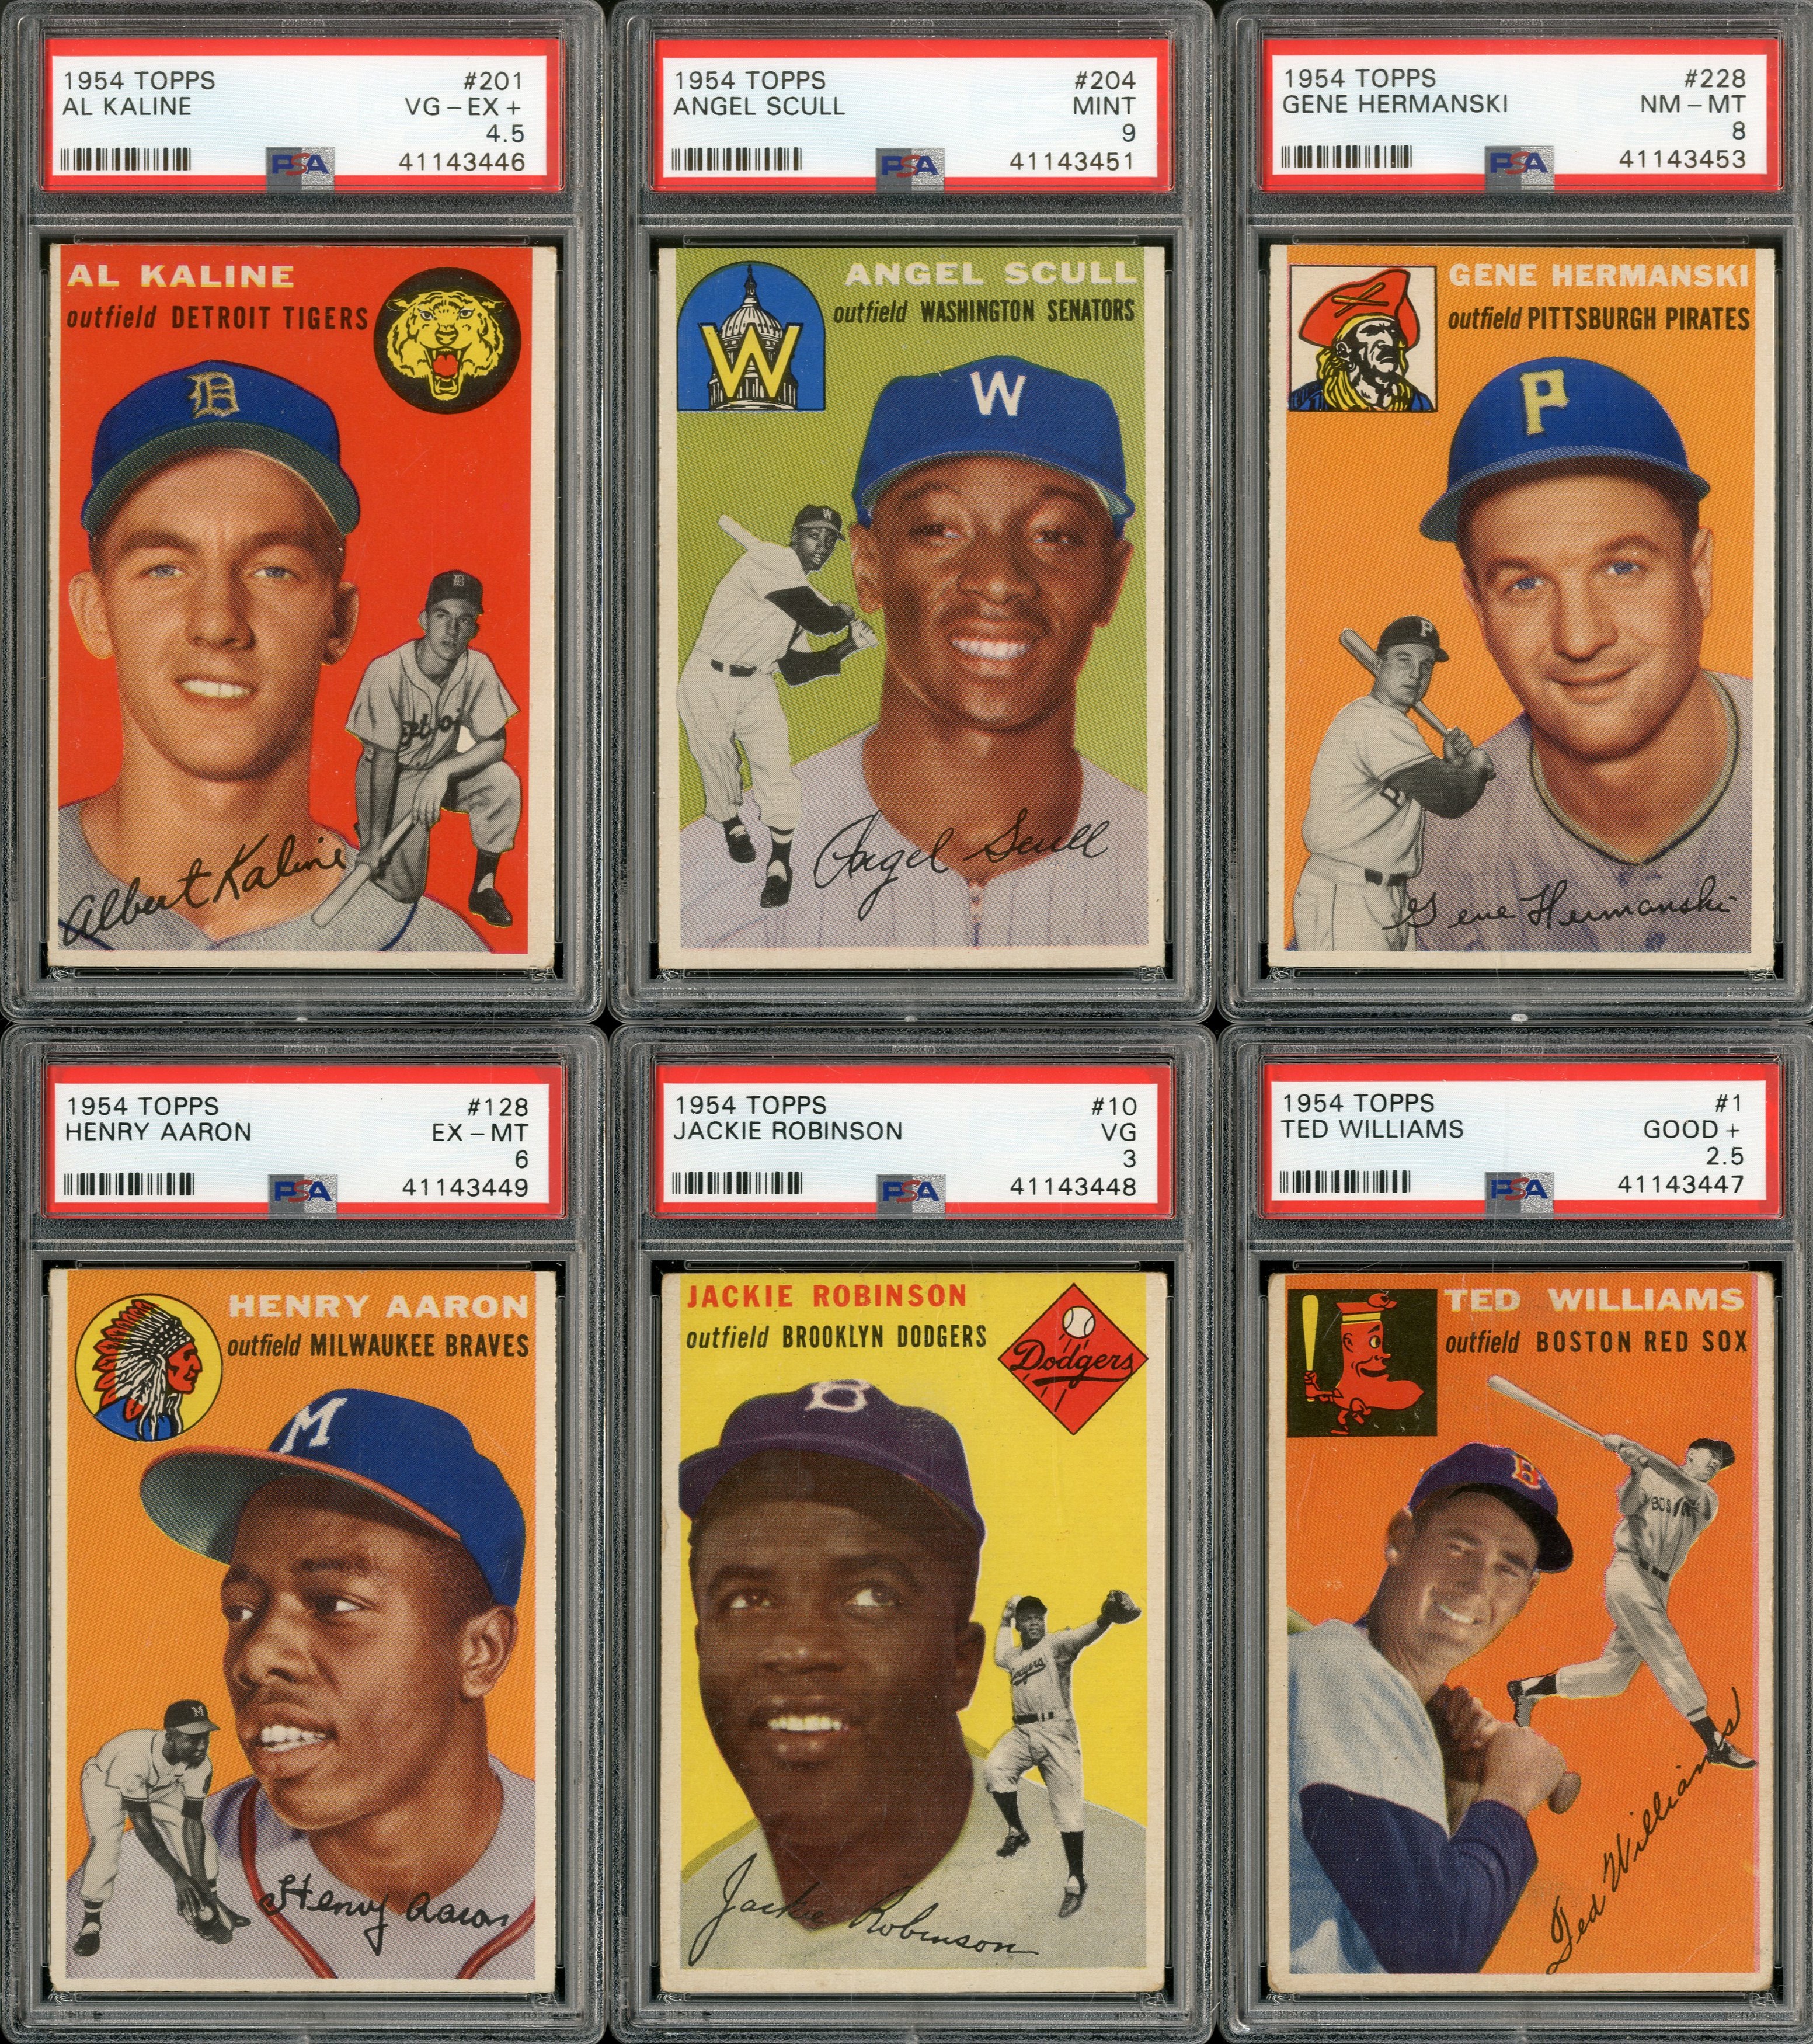 Baseball and Trading Cards - 1954 Topps Baseball Near-Complete Set w/Hank Aaron PSA 6 Rookie - Eight PSA Graded (247/250)